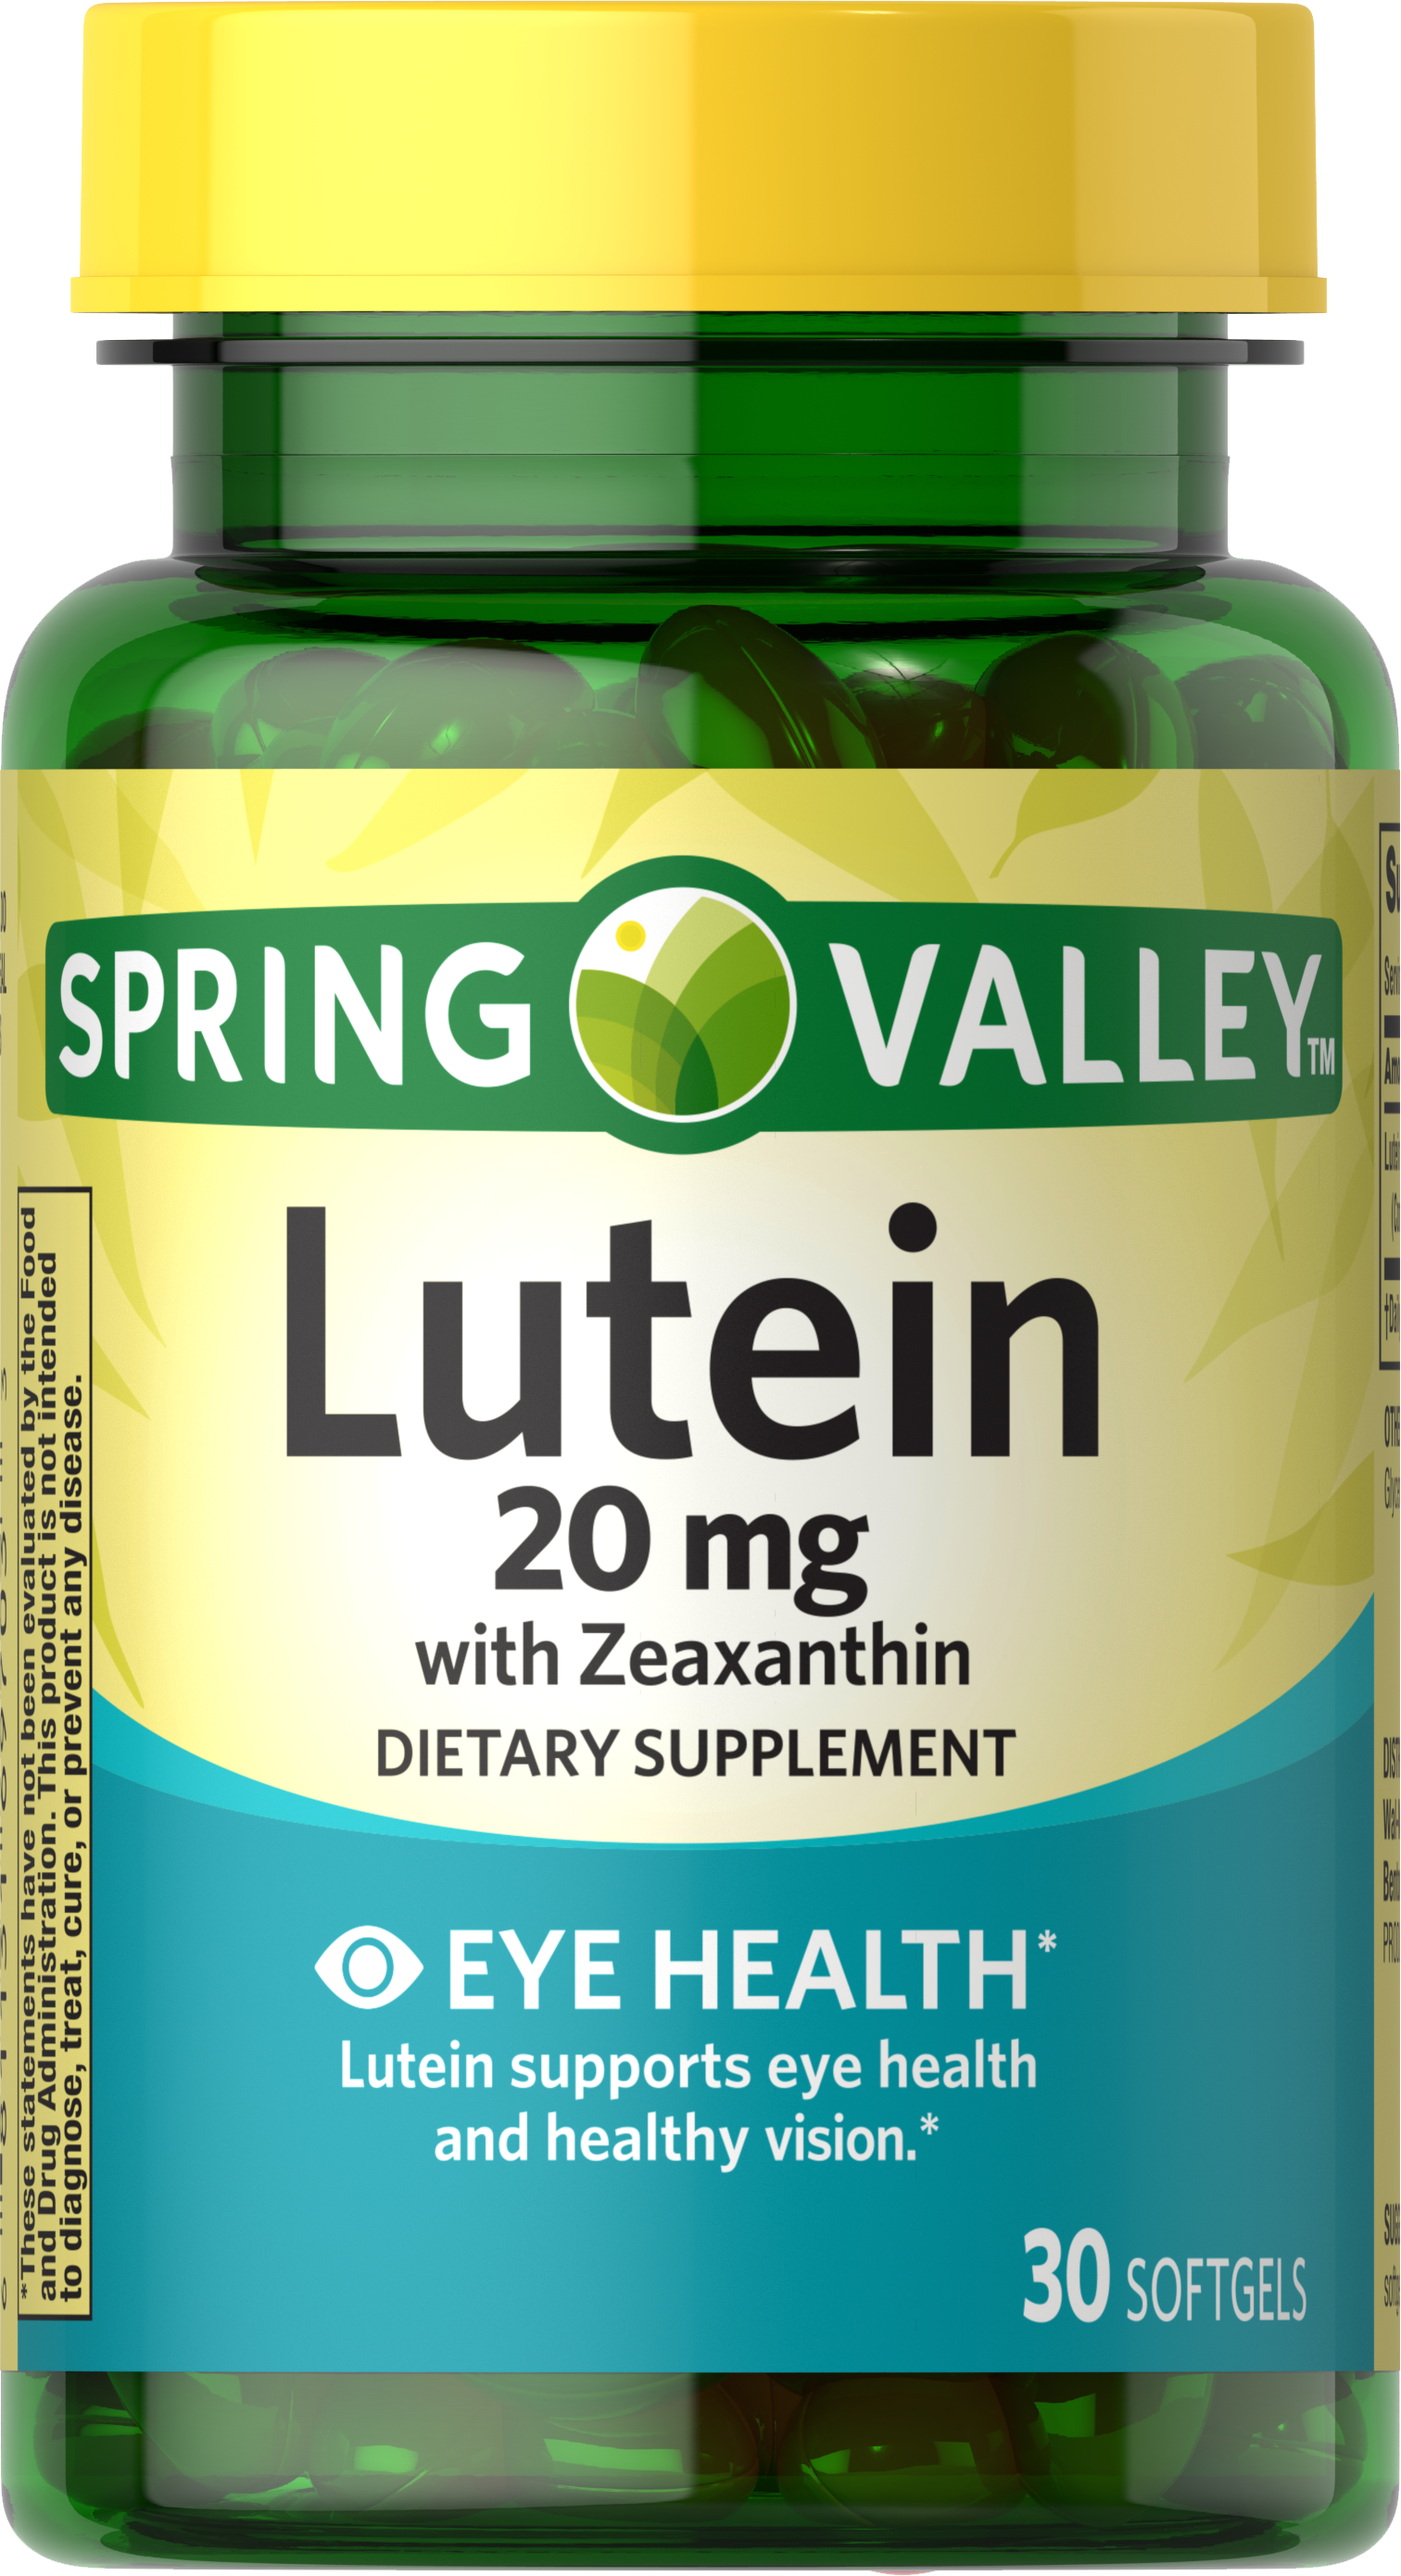 Spring Valley Lutein with Zeaxanthin Dietary Supplement, 20 mg, 30 Count - image 1 of 8